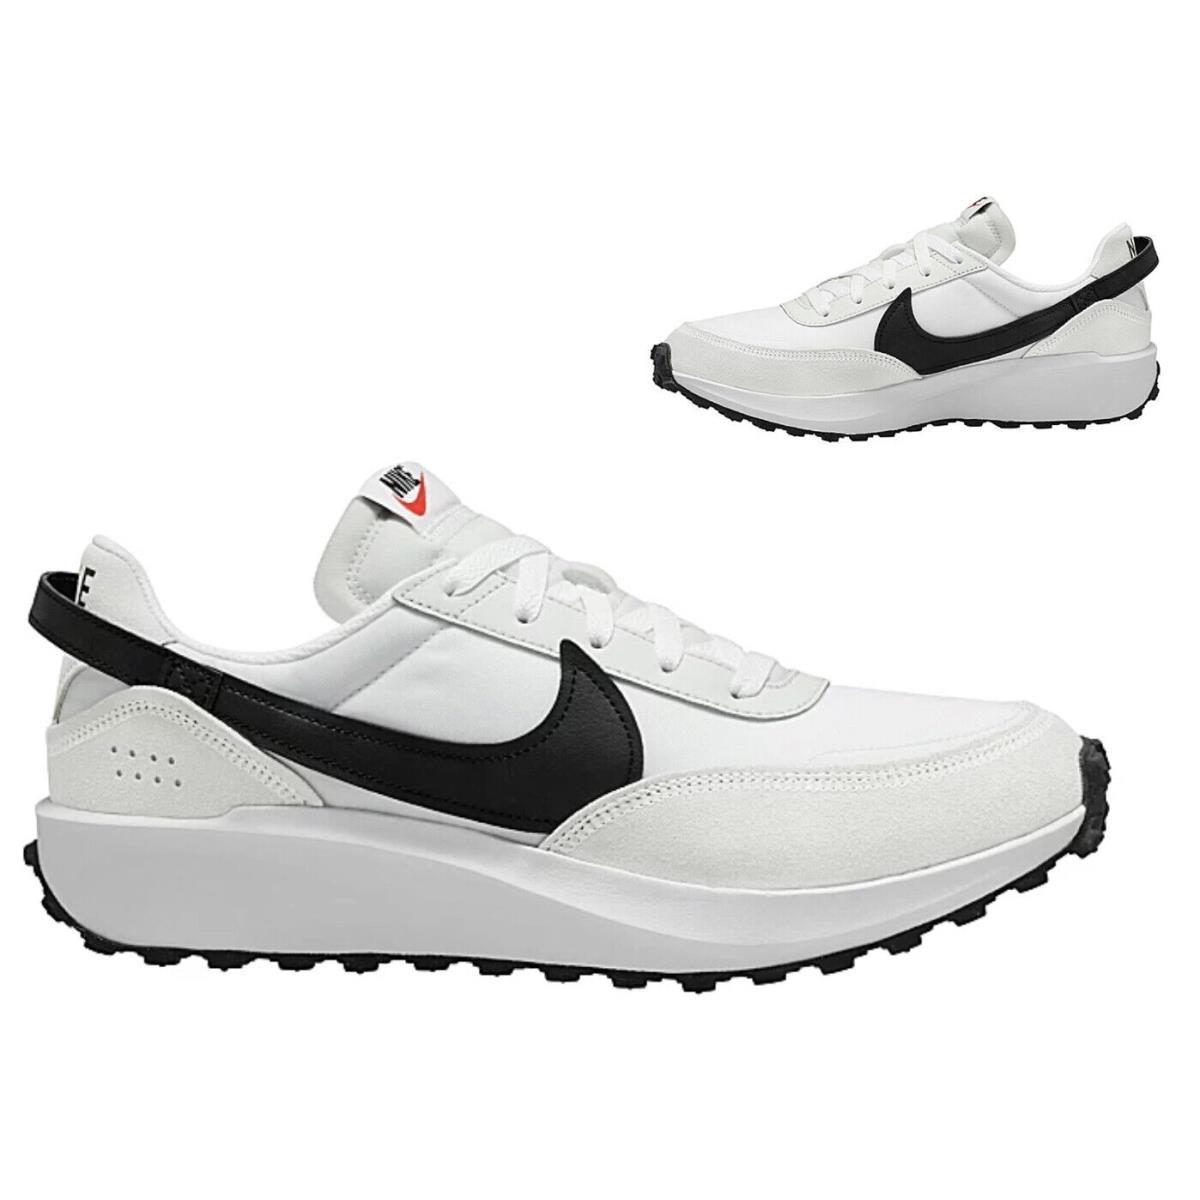 Nike Waffle Debut Athletic Sneakers Shoes Casual Mens White Black All Sizes